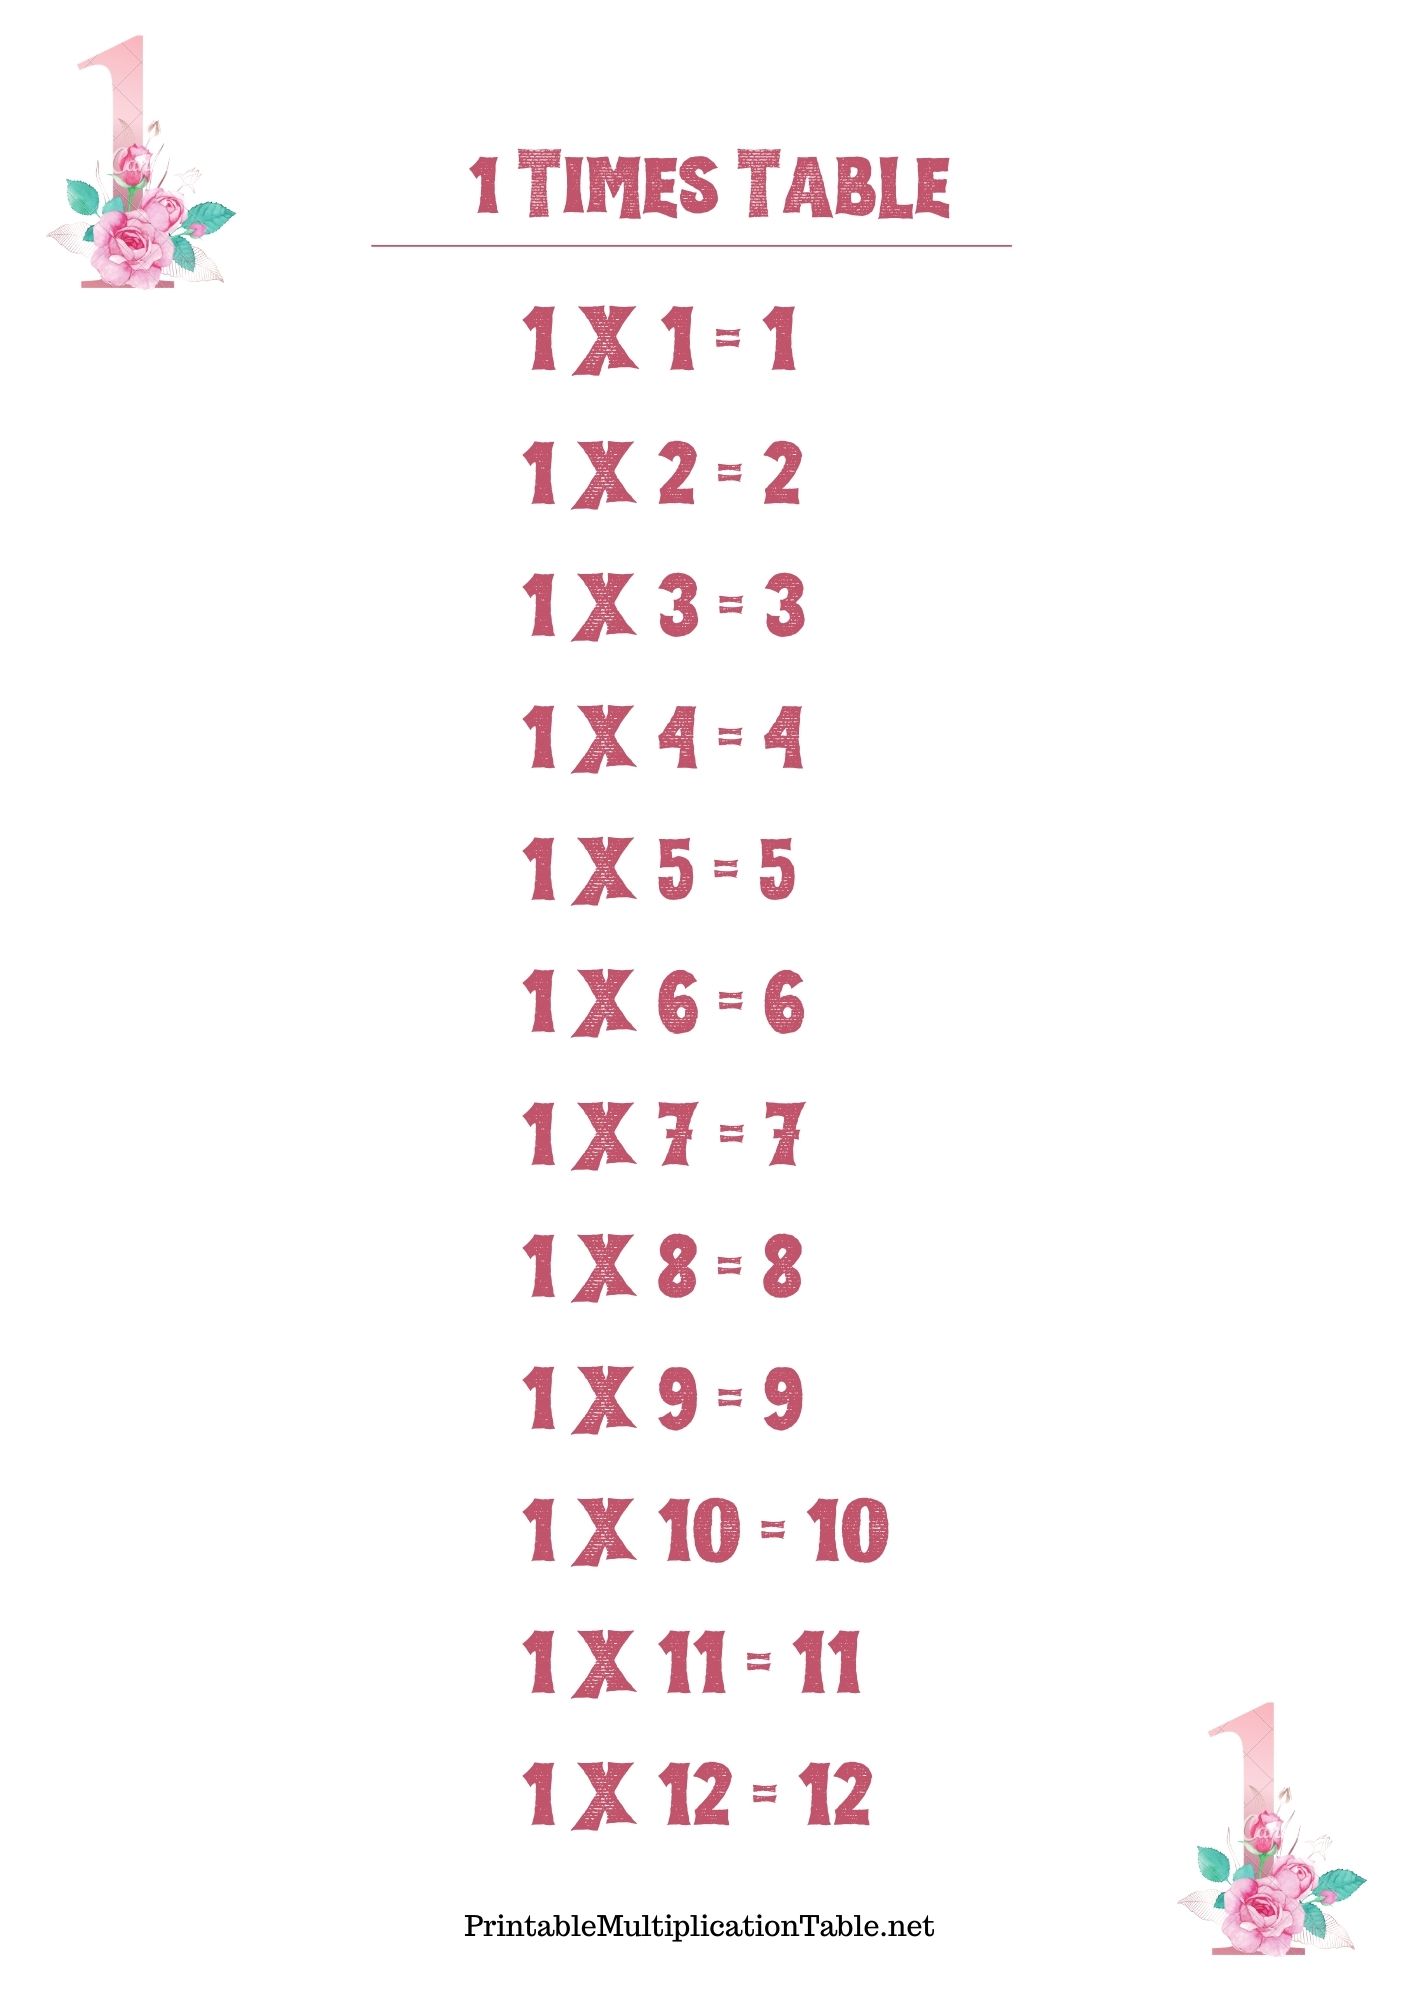 1 times table